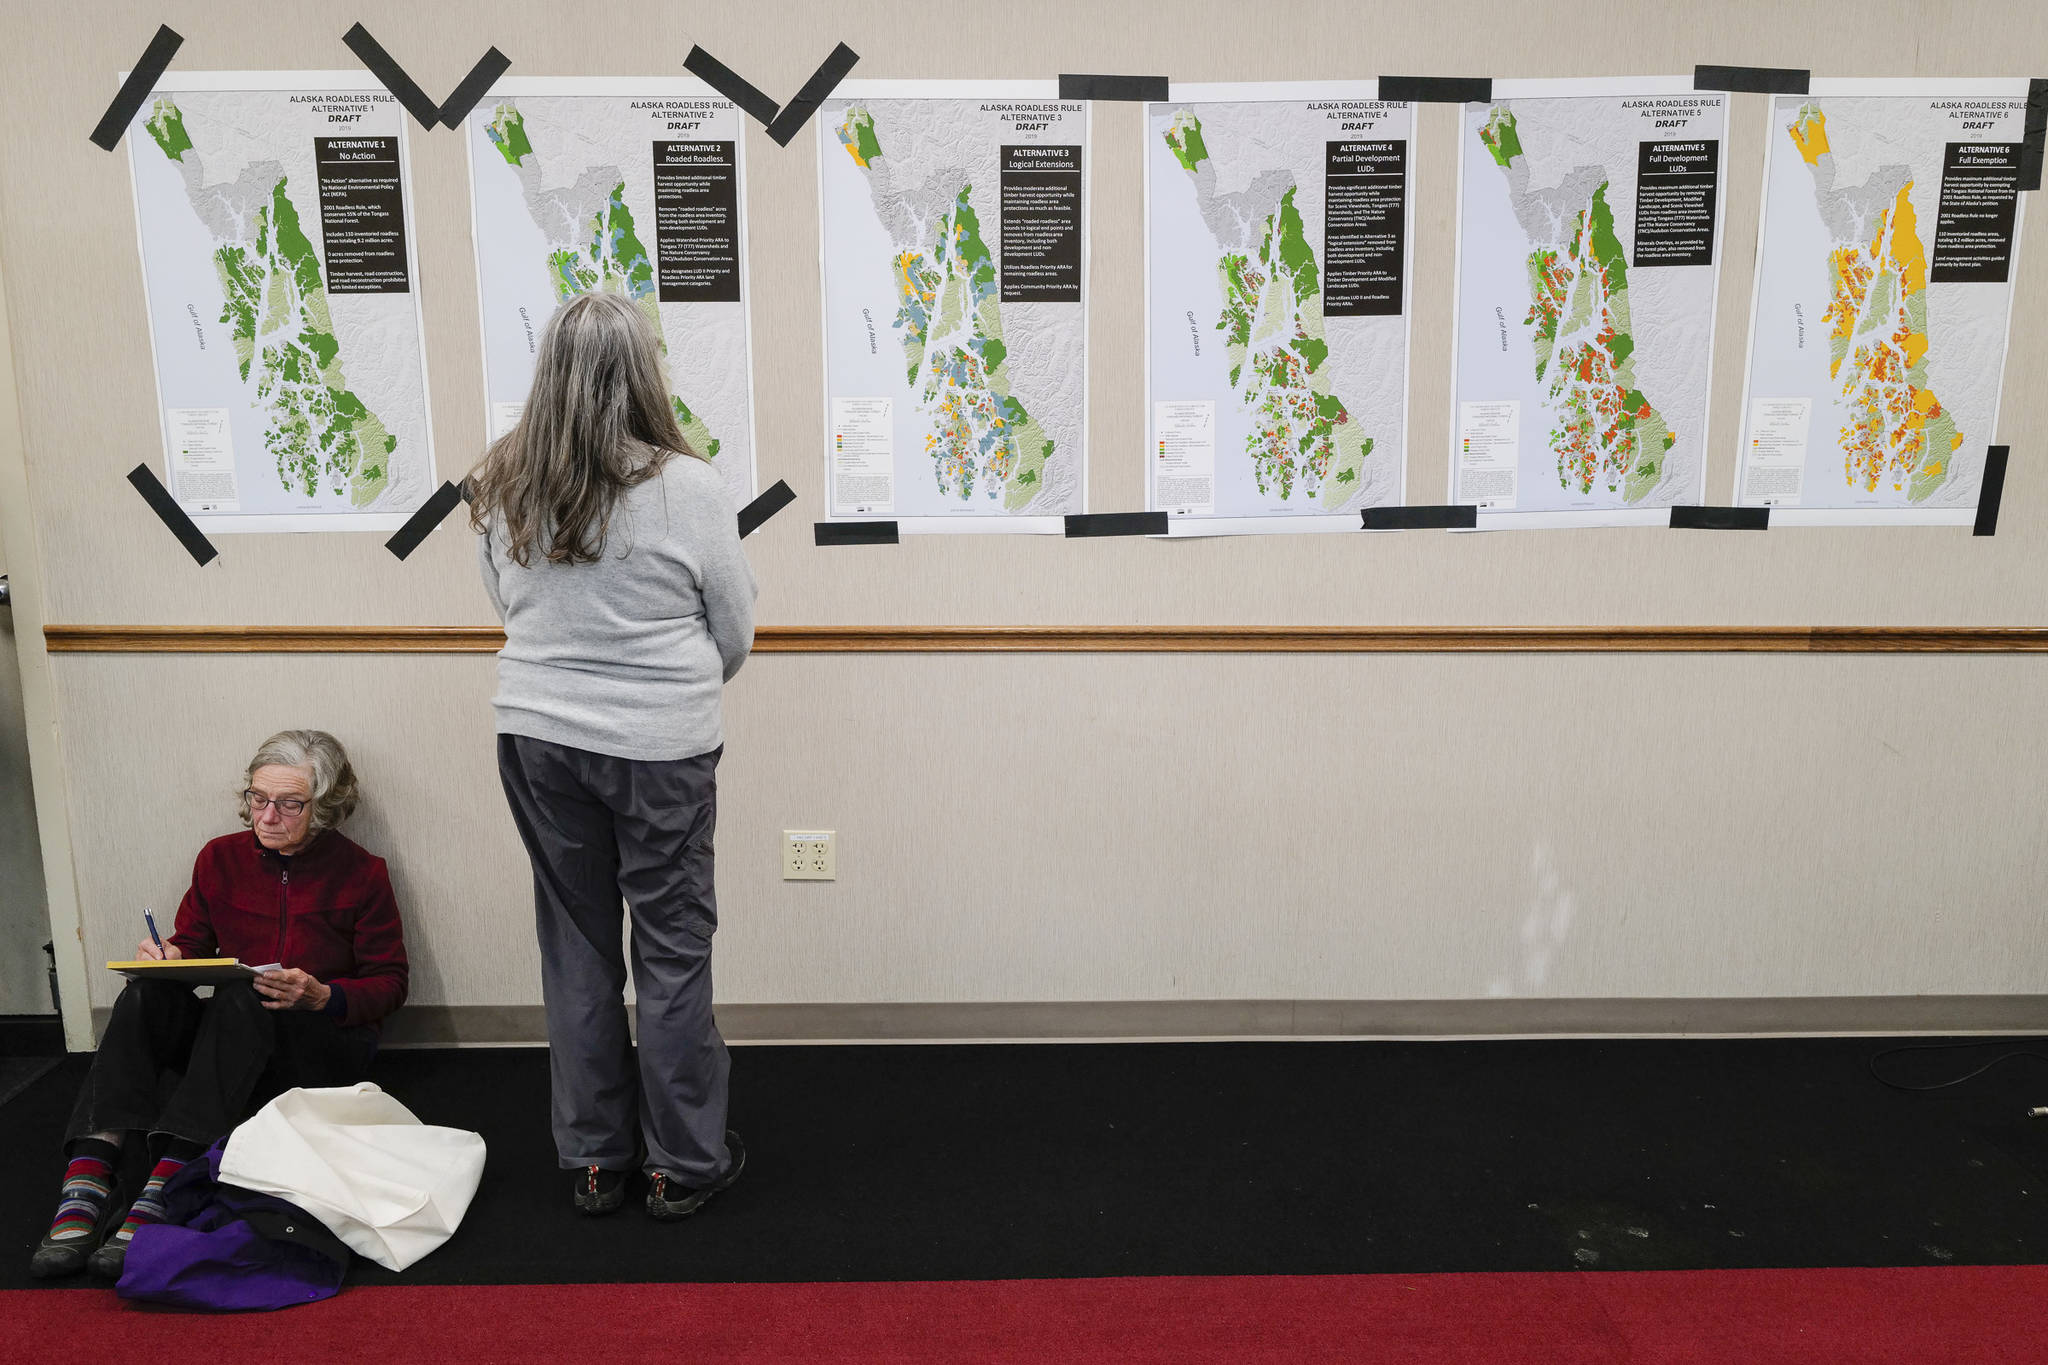 A Juneau resident studies maps for the six Alaska Roadless Areas Draft Environmental Impact Statement drafts during an informational meeting by U.S. Department of Agriculture Forest Service at Elizabeth Peratrovich Hall on Monday, Nov. 4, 2019. (Michael Penn | Juneau Empire)